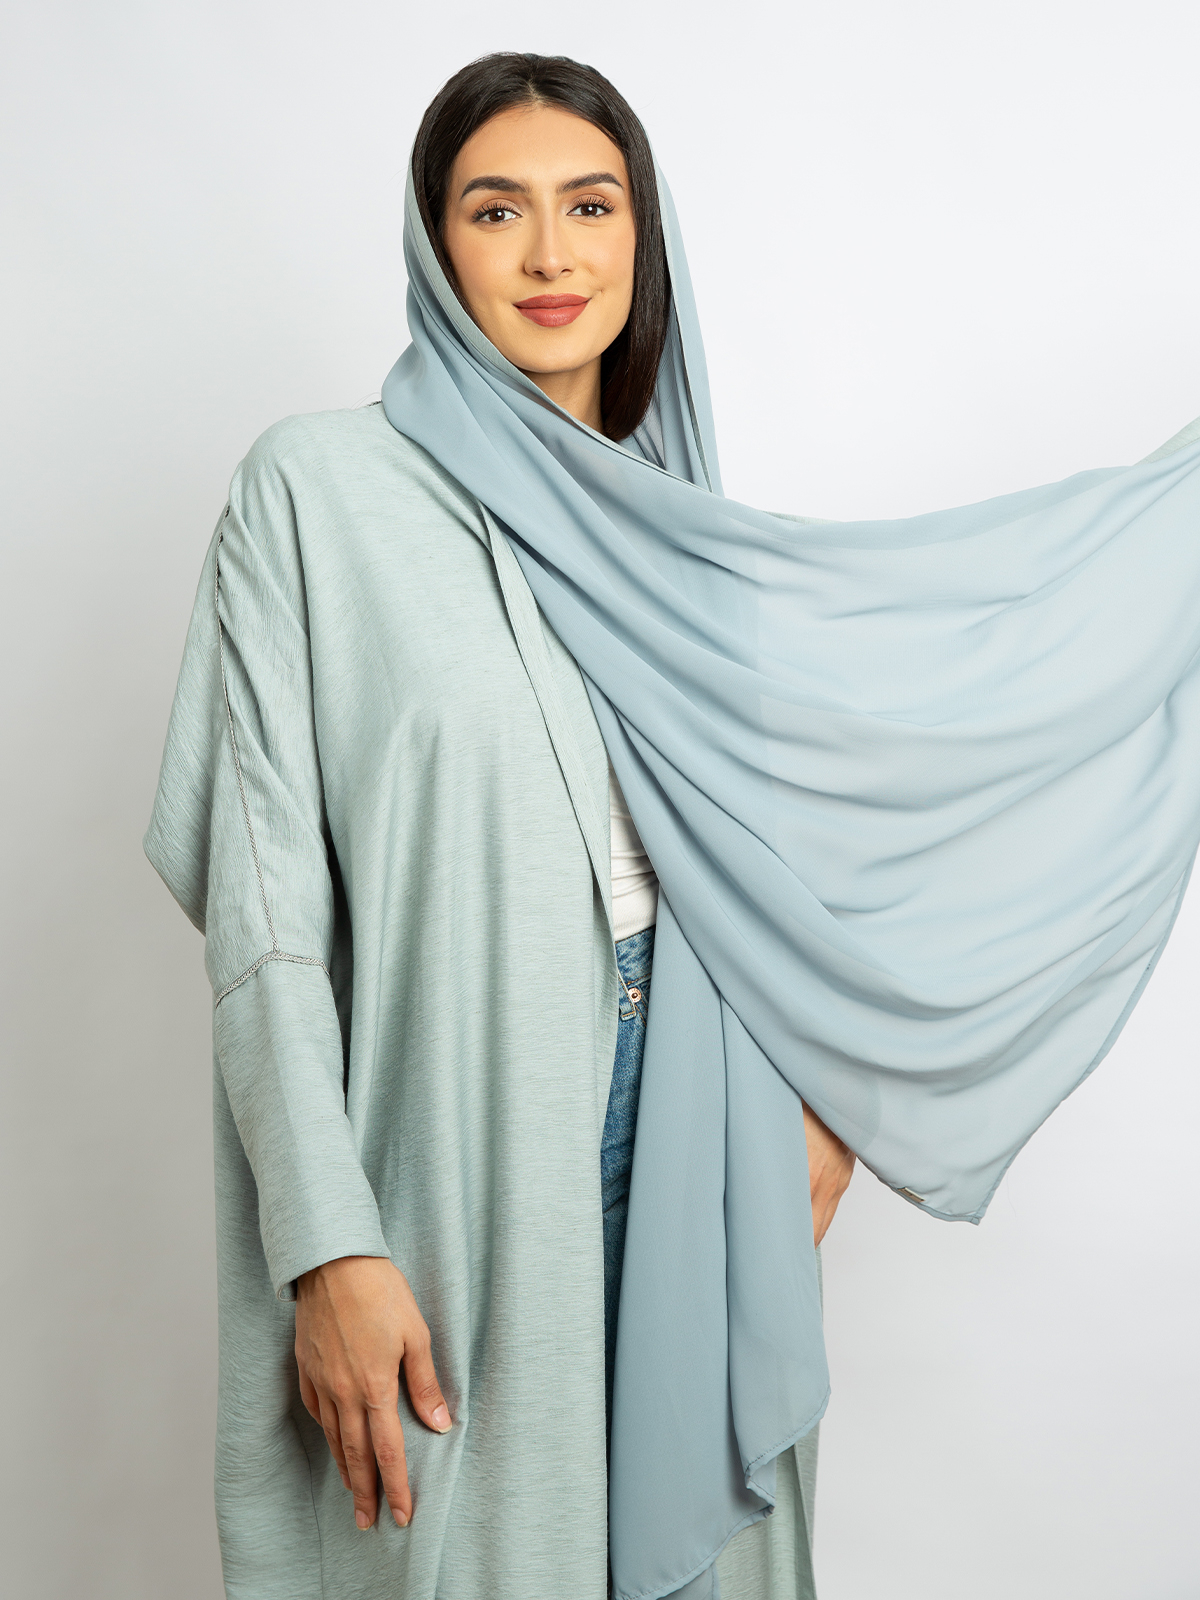 Open long half bisht abaya light blue color with Qitan in linen-feel fabric for work and events by kaafmeem clothing